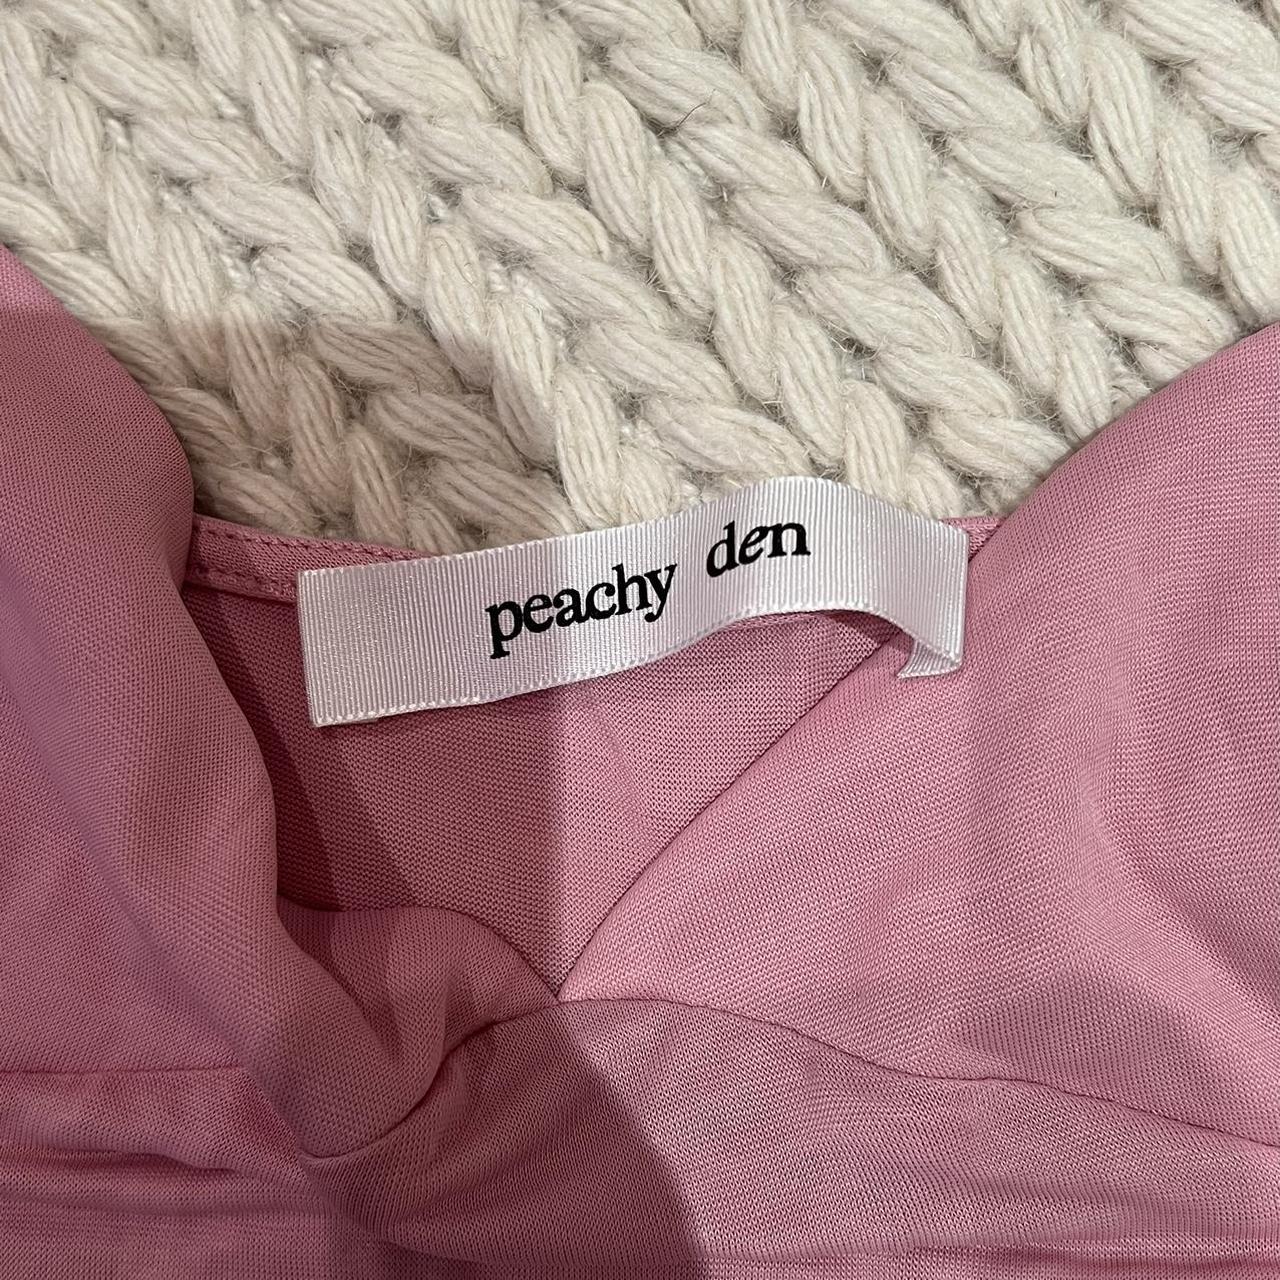 Peachy Den pink top Size S In perfect condition... - Depop